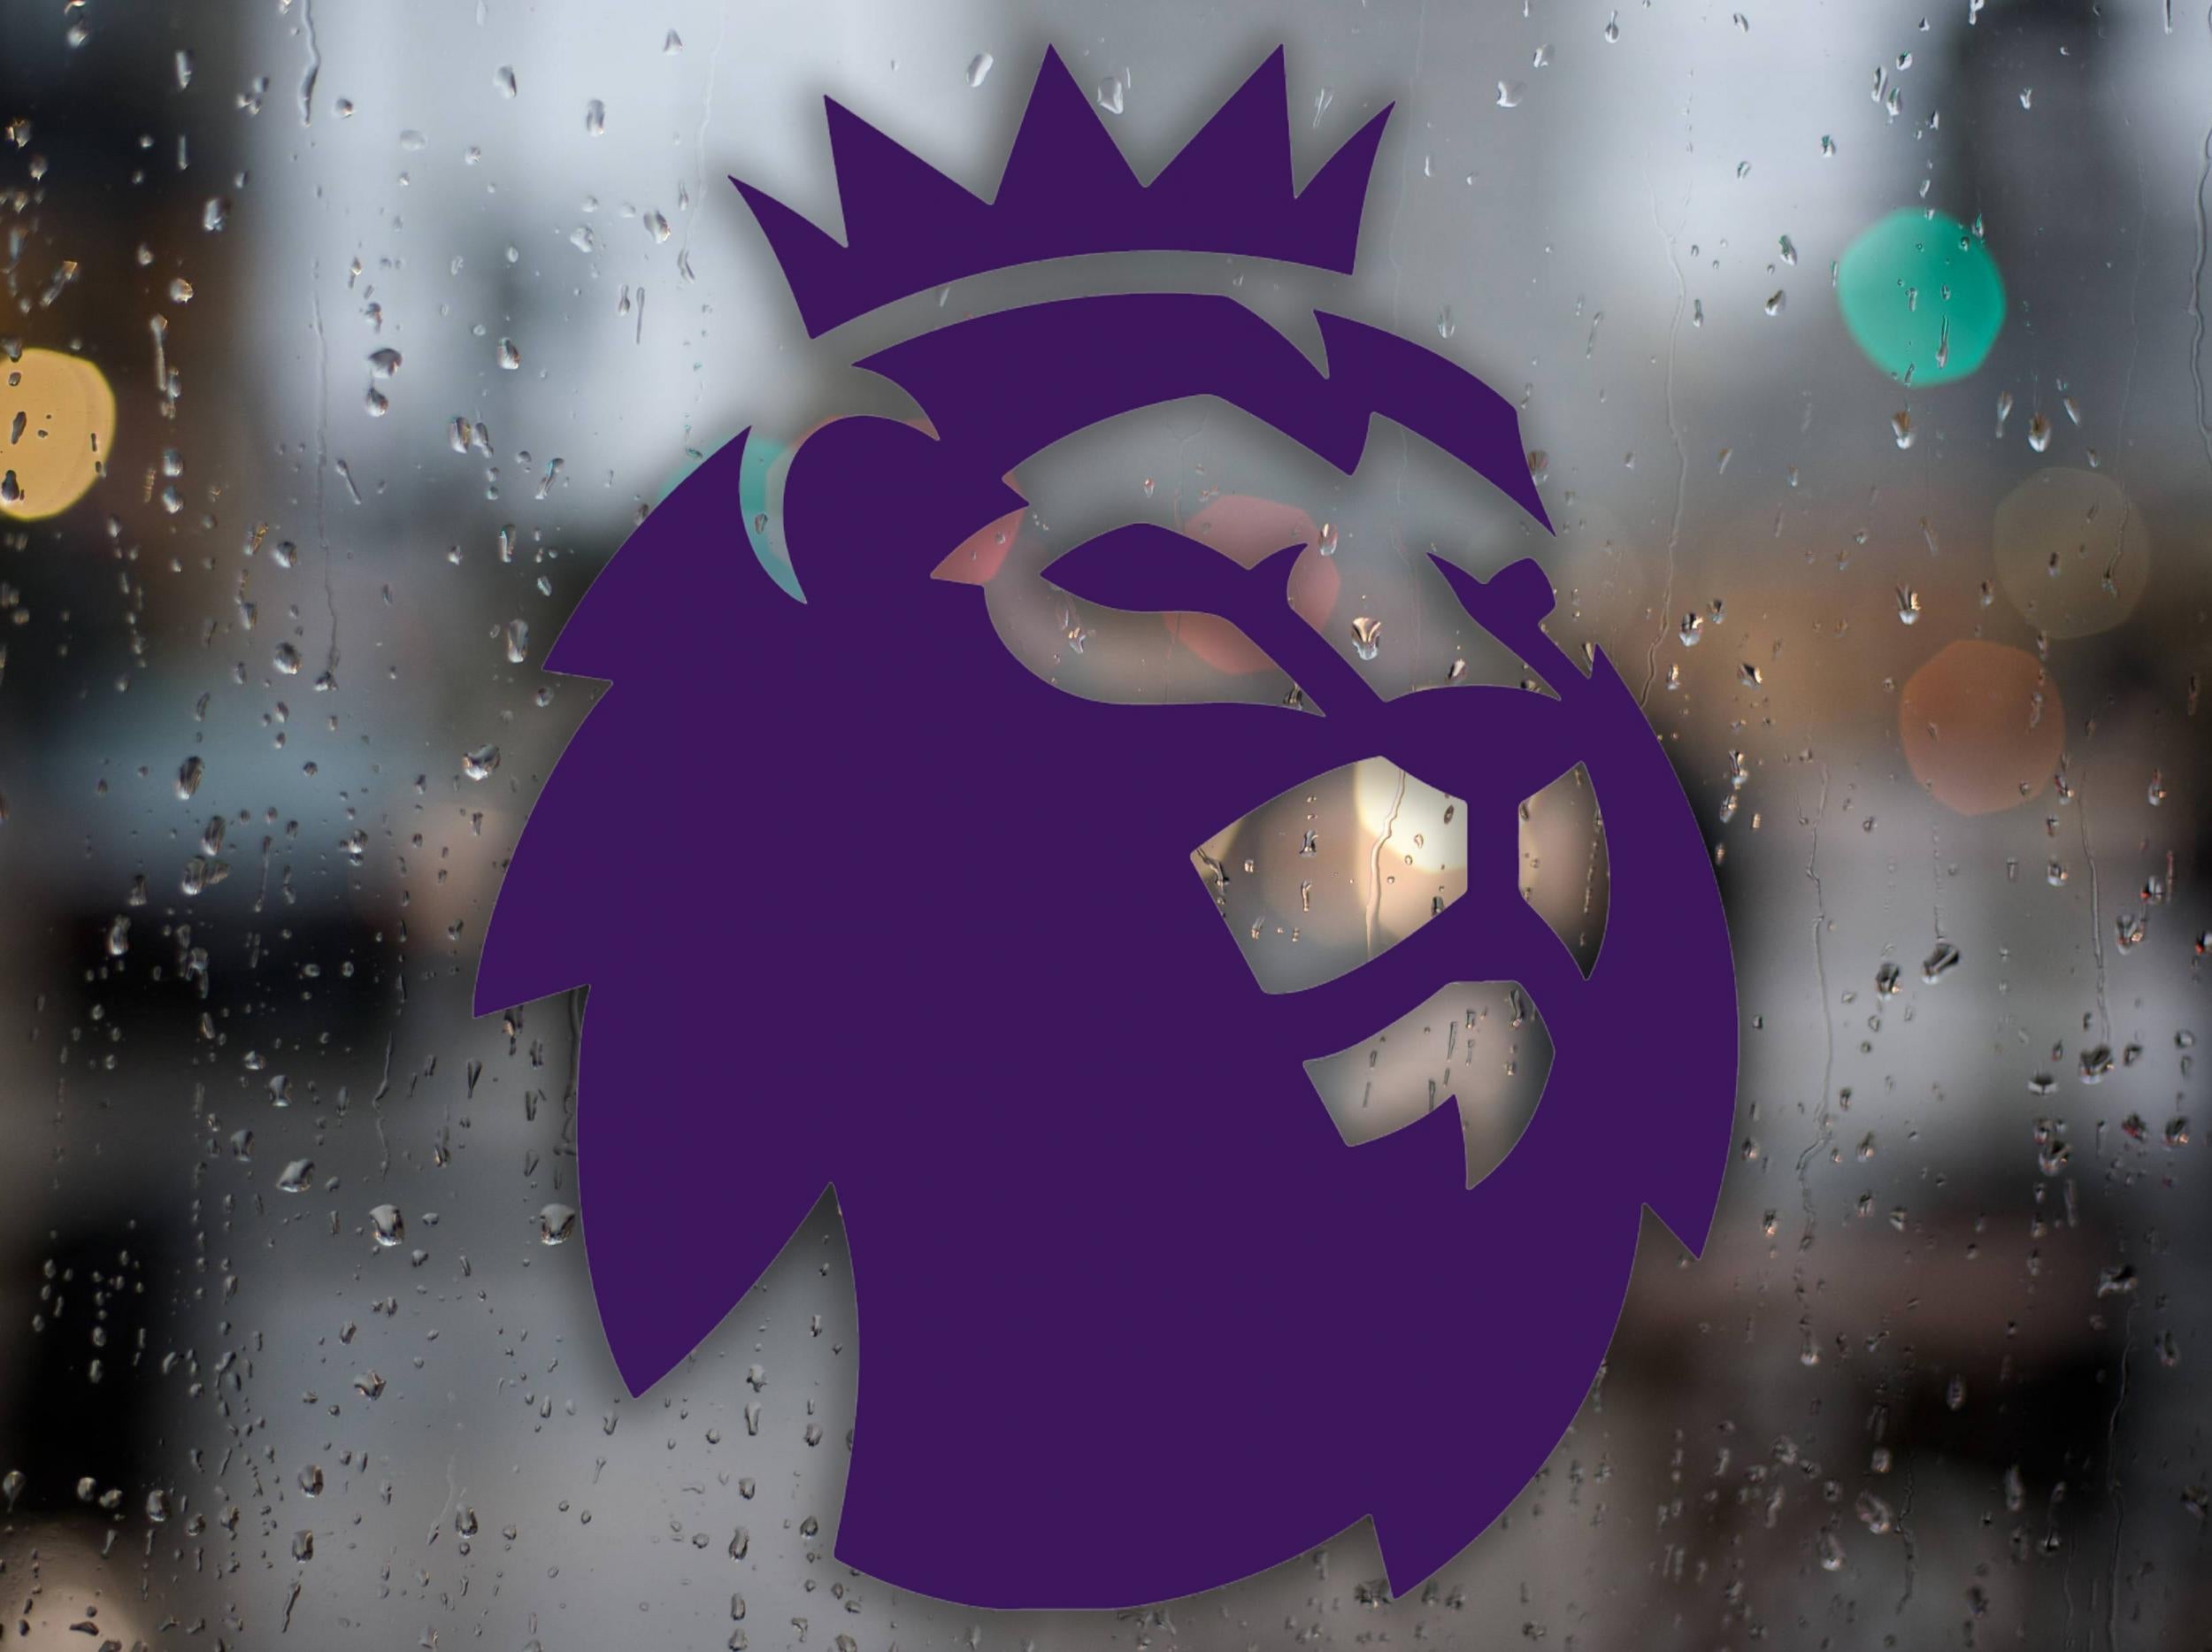 The Premier League has been suspended indefinitely